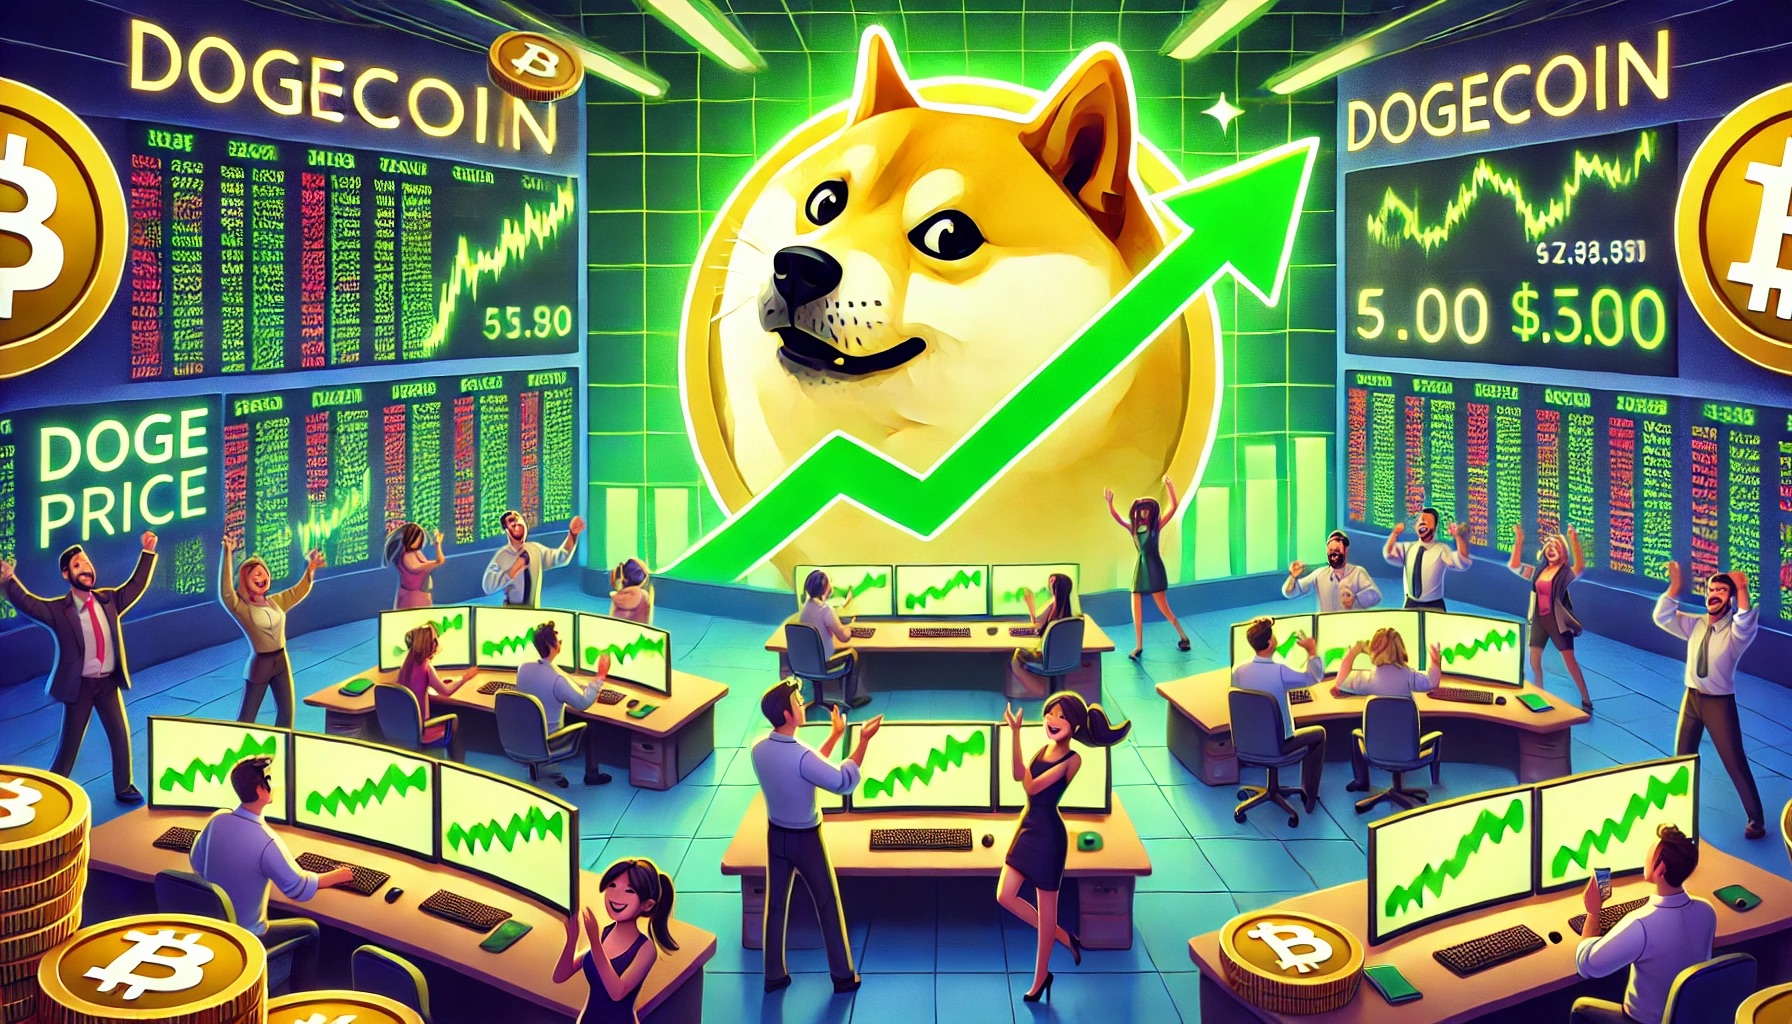 Crypto analyst Kevin (formerly OG Yomi) has made a bullish case for Dogecoin (DOGE). Based on his analysis, the foremost meme coin could replicate its 2021 bull run when it enjoyed a price gain of 18,000%. Dogecoin Could Soon Replicate Its 2021 Bull Run Kevin suggested in an X (formerly Twitter) post that Dogecoin could soon replicate its 2021 run when it made a price gain of 18,000%. This came following his statement that DOGE is two to three weeks away from achieving its first weekly golden cross in four years. The analyst noted that the meme coin went “parabolic” for six straight months and enjoyed a price rally of 18,000% the last time this happened in 2021. Related Reading: Cardano In The Spotlight: Why The $0.6 Level Is Important To ADA Crypto analysts like Javon Marks have also raised the possibility of Dogecoin replicating its 2021 run and even surpassing it at different points in this market cycle. Marks predicted that the foremost meme coin could enjoy a price rally of over 21,000% in this bull run and rise to $17. This prediction is based on Dogecoin’s historical breakout trend, in which the meme coin has enjoyed more significant price rallies in every subsequent bull run. More recently, Marks stated that Dogecoin’s rise to $0.6533 is only a matter of time and that the meme coin could enjoy a 90% price rally to $1.25. While the analyst’s price prediction of $17 is undoubtedly ambitious since it will give Dogecoin a market cap of about $2.4 trillion, the price target of $1 looks more feasible, and this is a price level that some other analysts, like Altcoin Sherpa, have agreed that DOGE can reach. In the meantime, investors hope that Dogecoin can successfully achieve the Golden Cross and that history will repeat itself. DOGE is well in need of such a move, considering how the foremost meme coin has underperformed in comparison to other major meme coins like Pepe (PEPE), Floki (FLOKI), and Dogwifhat (WIF). One Last Opportunity To Buy DOGE Crypto analyst The Cryptomist recently suggested that investors will have one last opportunity to buy Dogecoin at a discount before it makes its parabolic move. Based on a rising wedge pattern highlighted on Dogecoin’s chart, she predicts that the foremost meme coin will still drop to as low as $0.08 and possibly $0.05. Related Reading: End Of The Road? Shiba Inu’s Shibarium Sees Massive 80.3% Crash In Active Accounts However, she is bullish on Dogecoin long-term, stating that the foremost meme coin has a “high chance” of reaching $1 this year. Crypto analyst Crypto Kaleo also recently predicted that Dogecoin could drop to as low as $0.08 before it runs to $1. At the time of writing, Dogecoin is trading at around $0.129, up over 4% in the last 24 hours, according to data from CoinMarketCap. Featured image created with Dall.E, chart from Tradingview.com